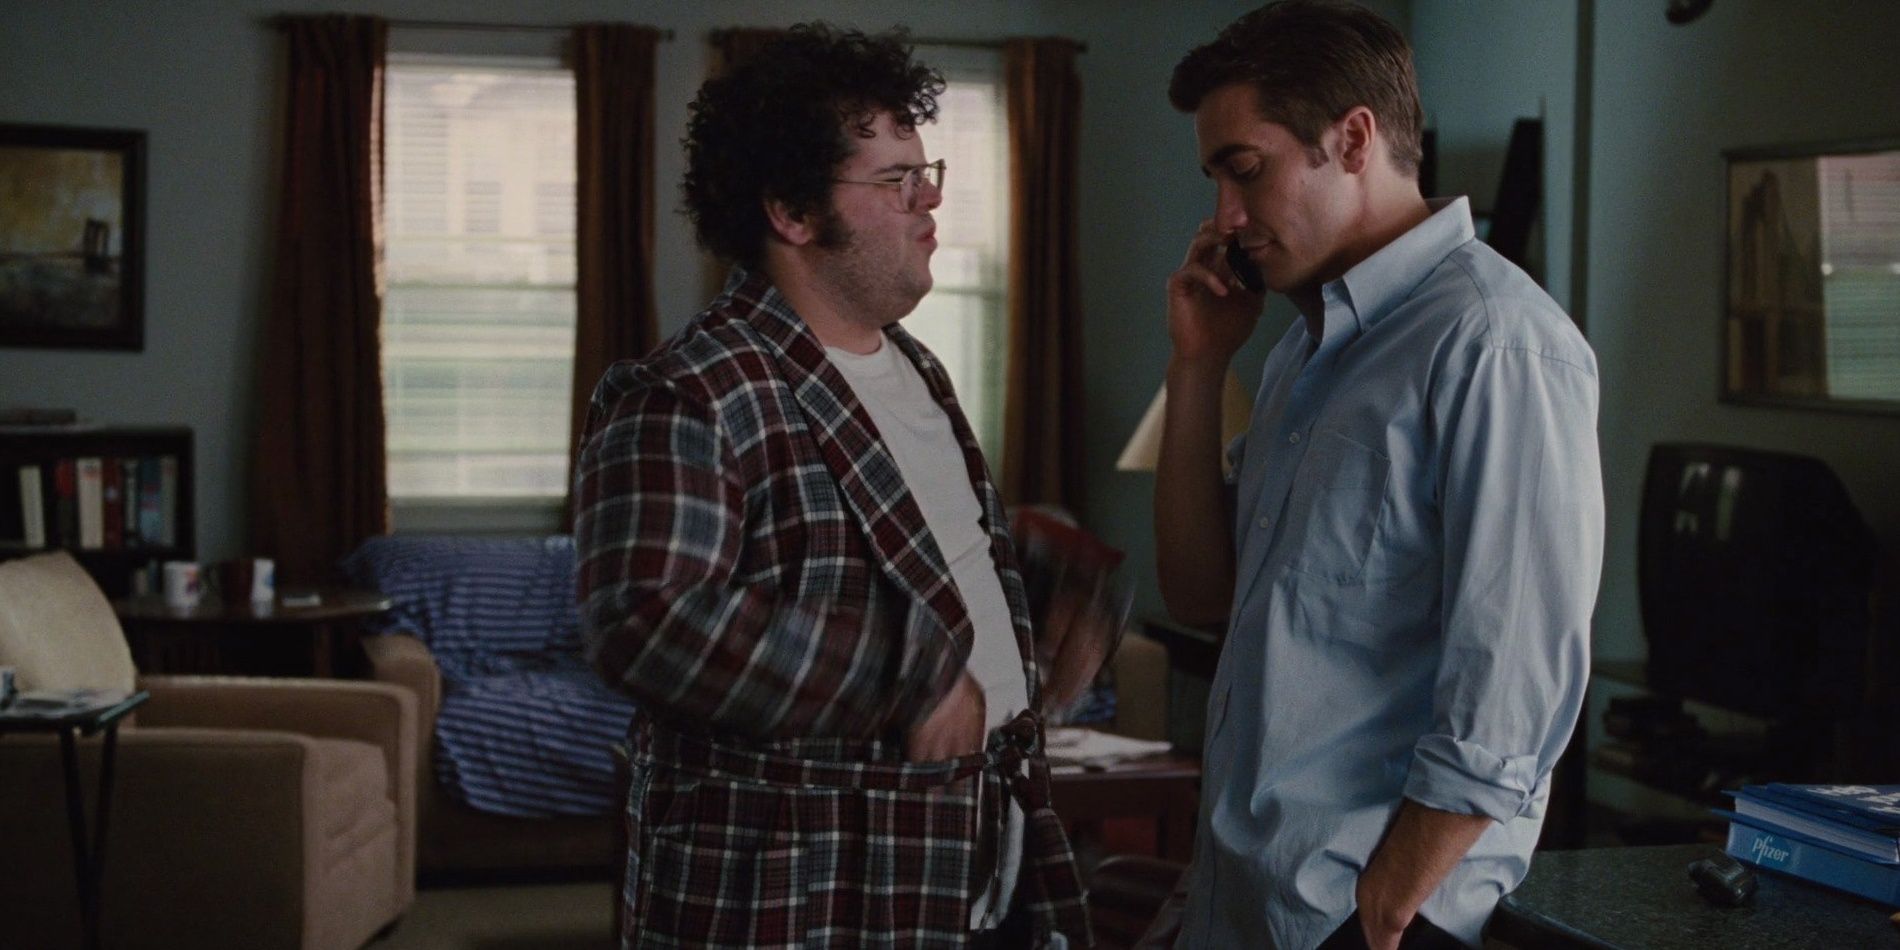 Josh Gad playing Jake Gyllenhaal's character's brother in Love and Other Drugs